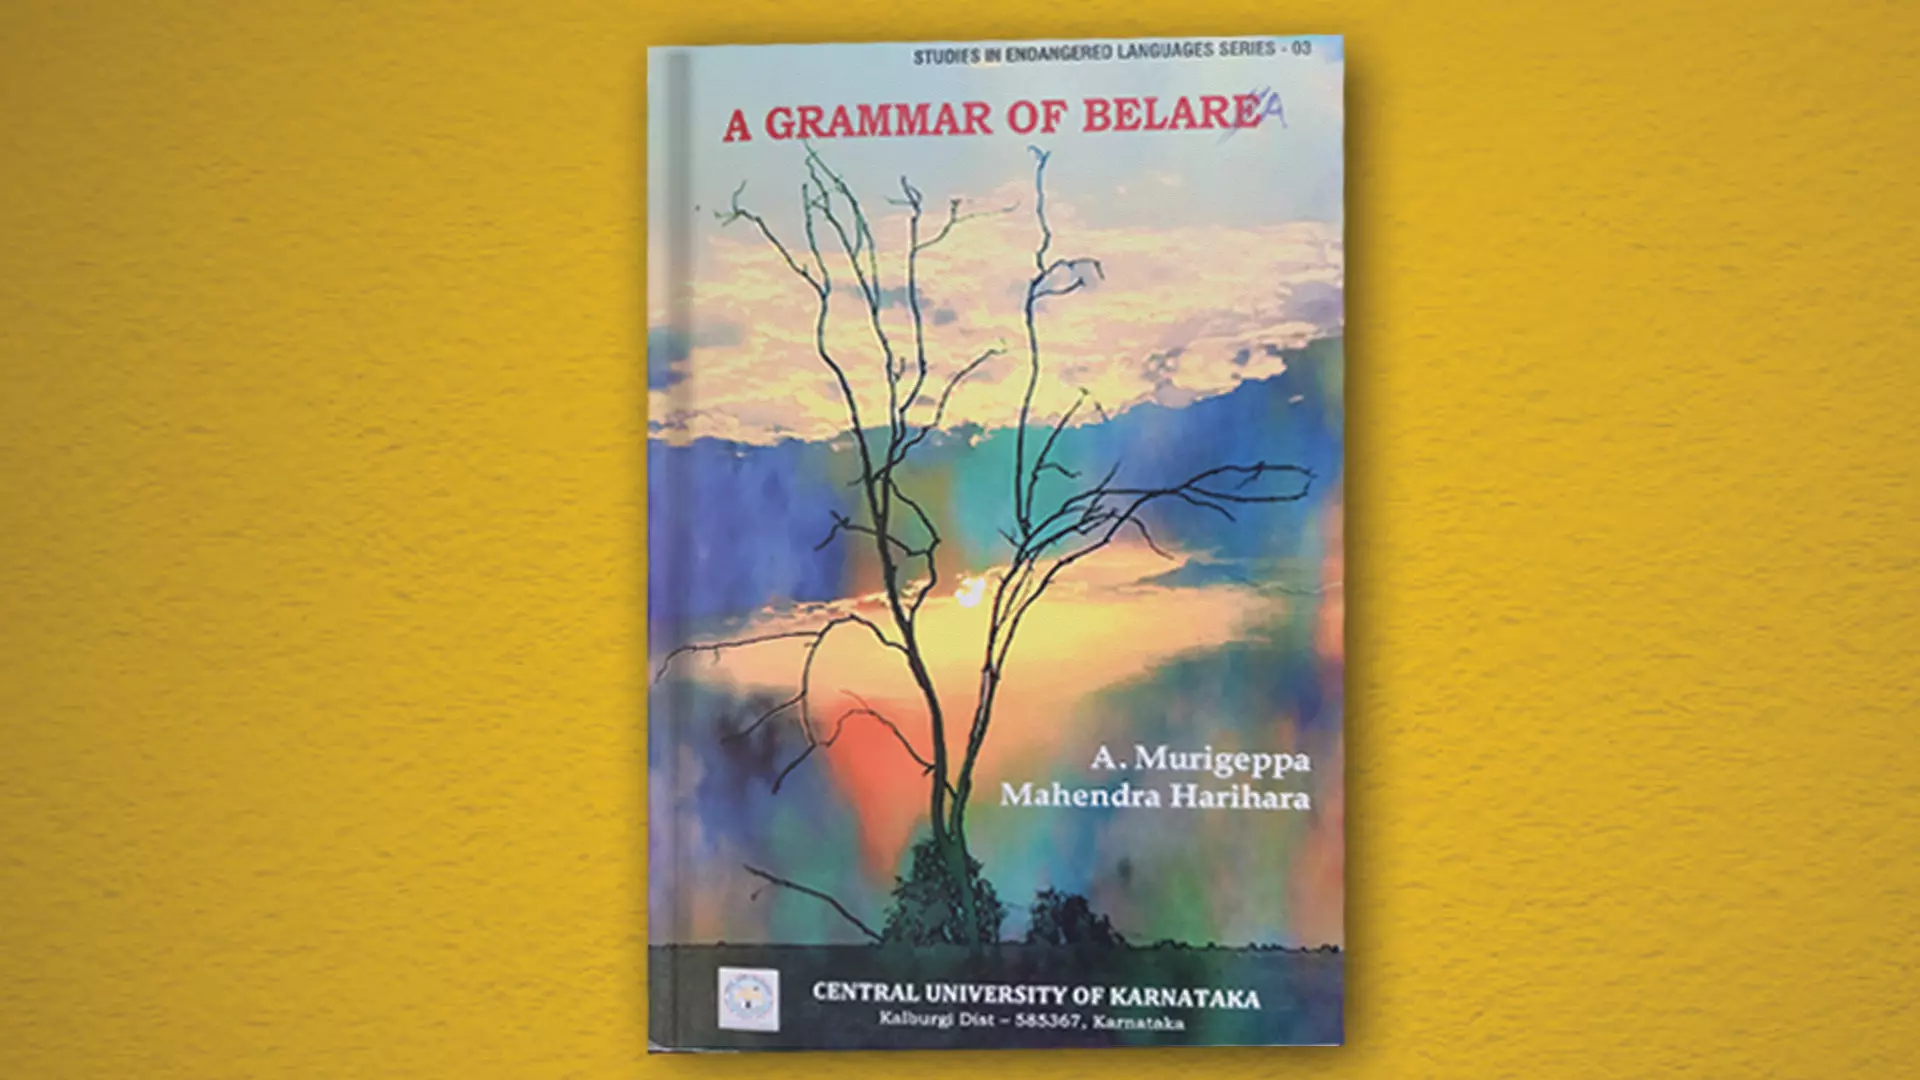 Prof A Murigeppa and Dr Mahendra Harihara penned A Grammar of Belare. 